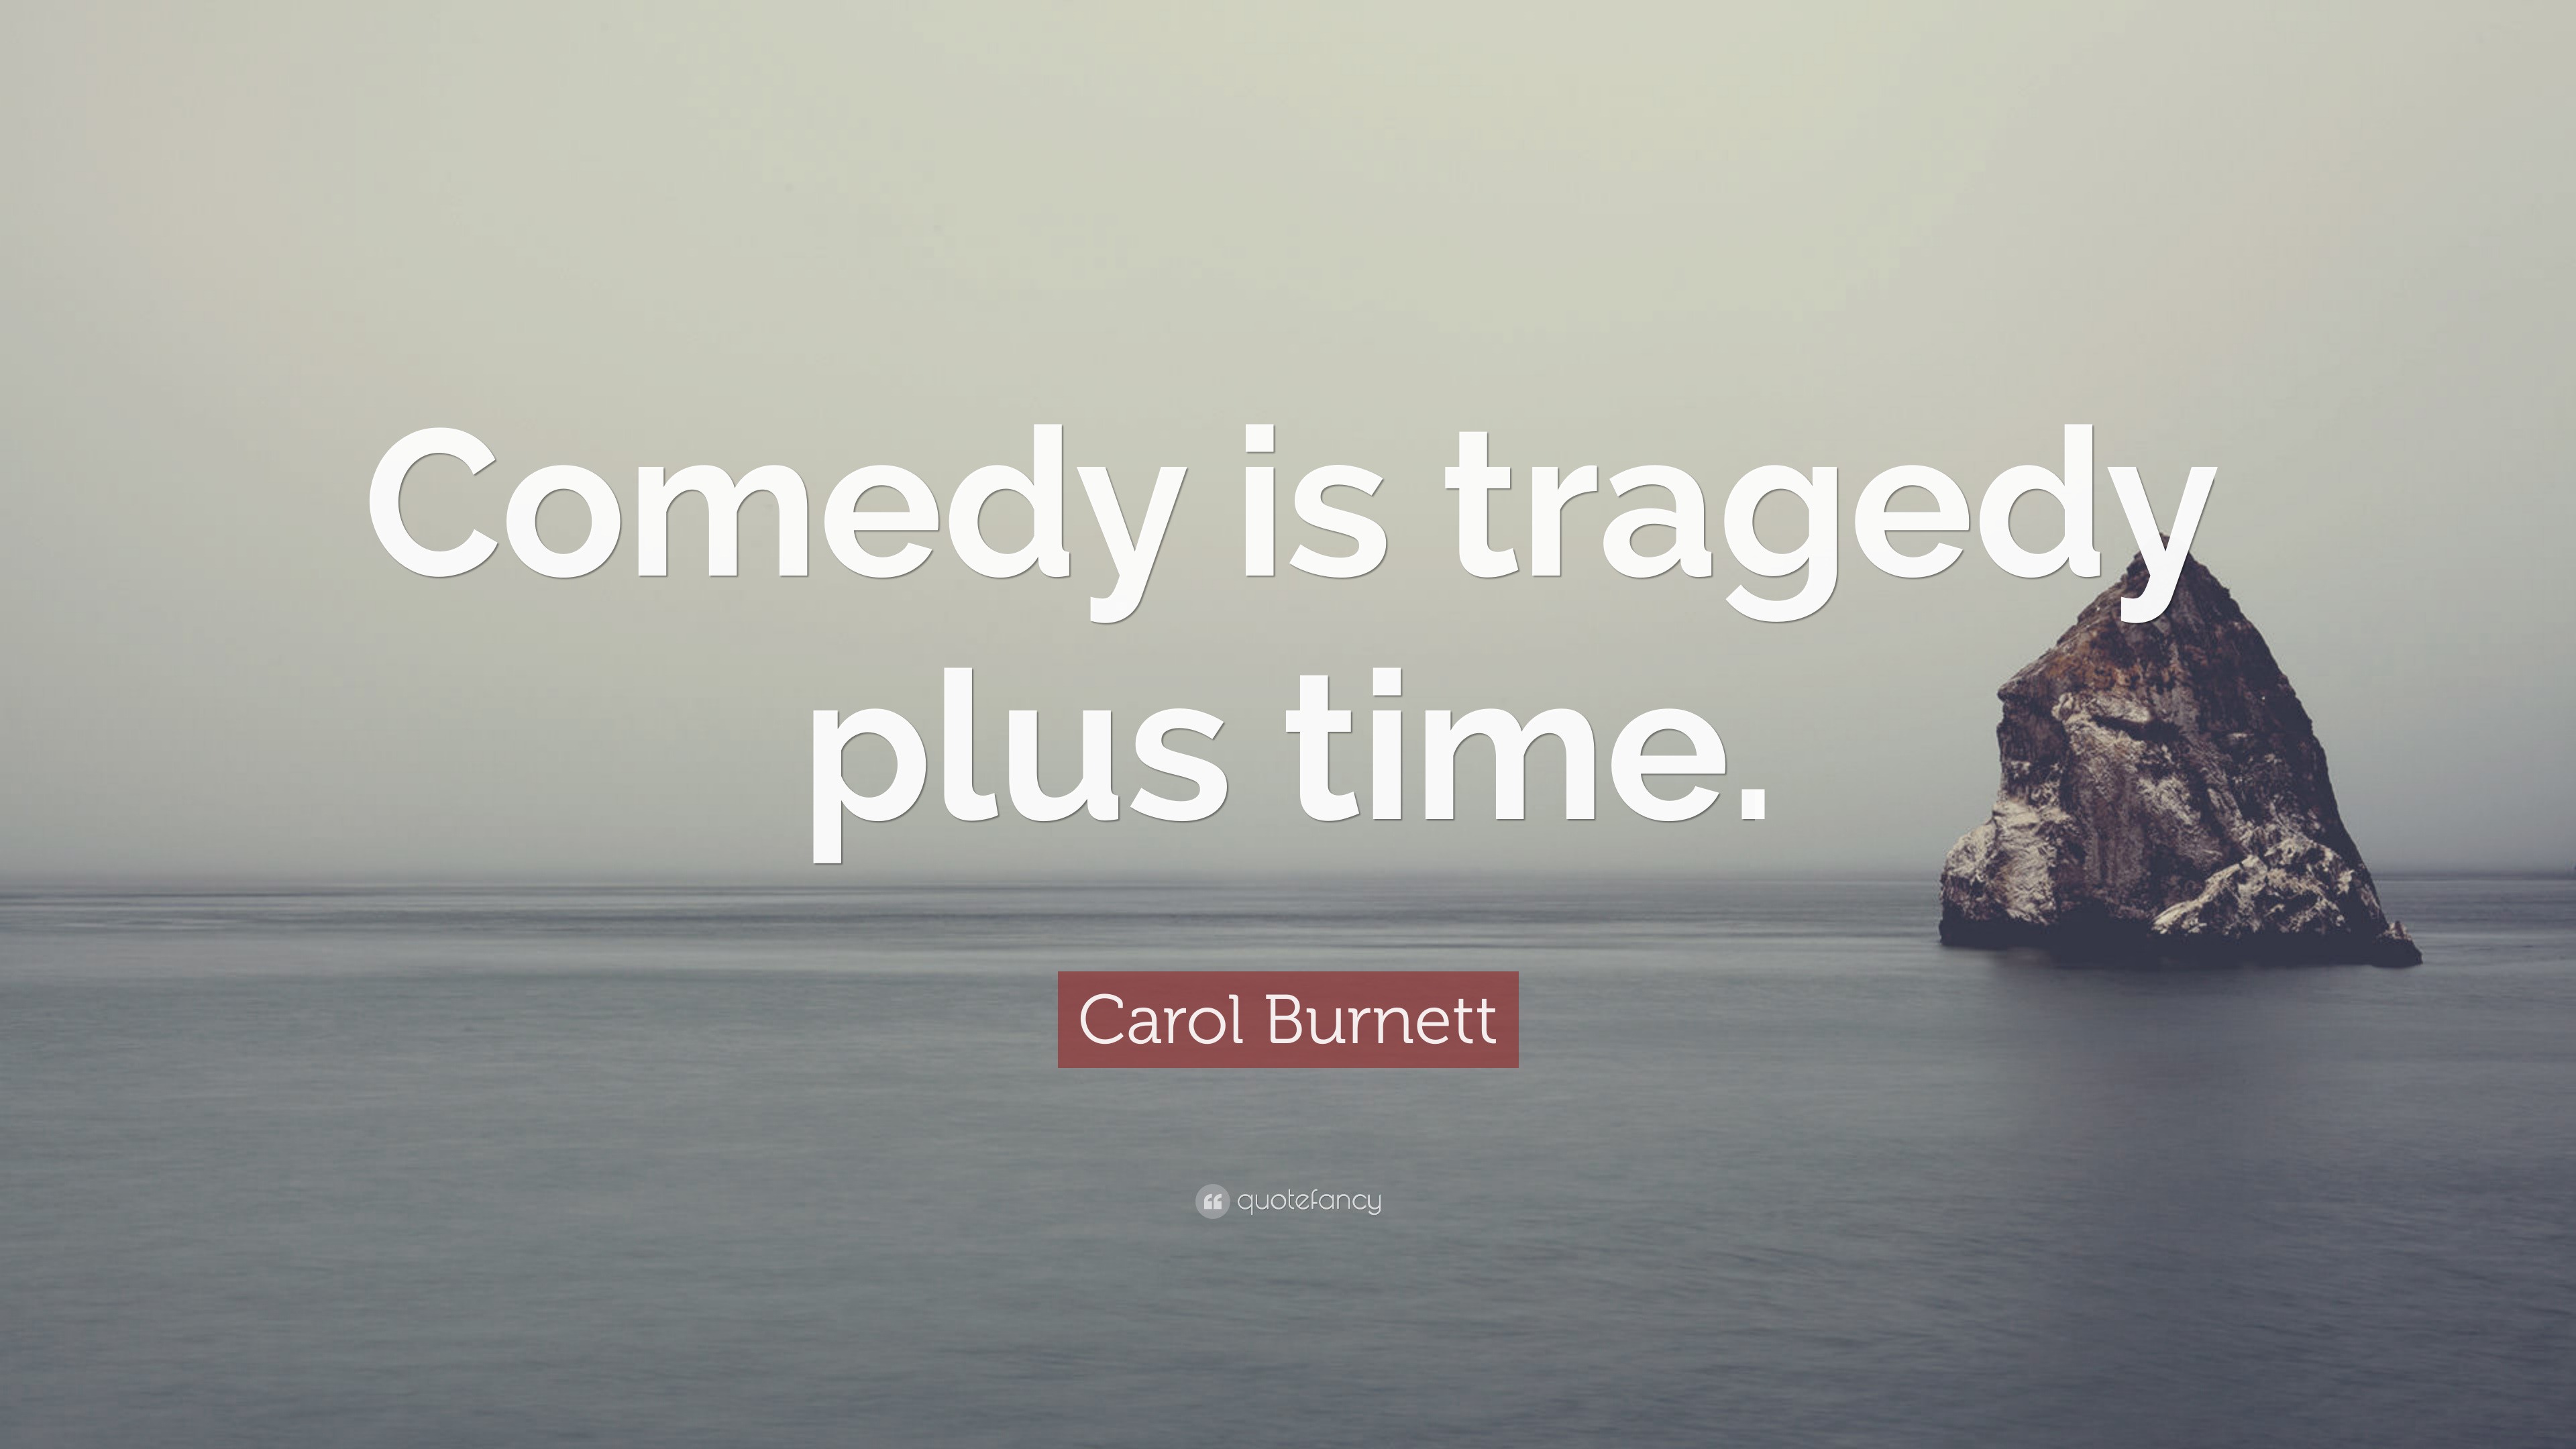 Carol Burnett Quote: “Comedy is tragedy plus time.”